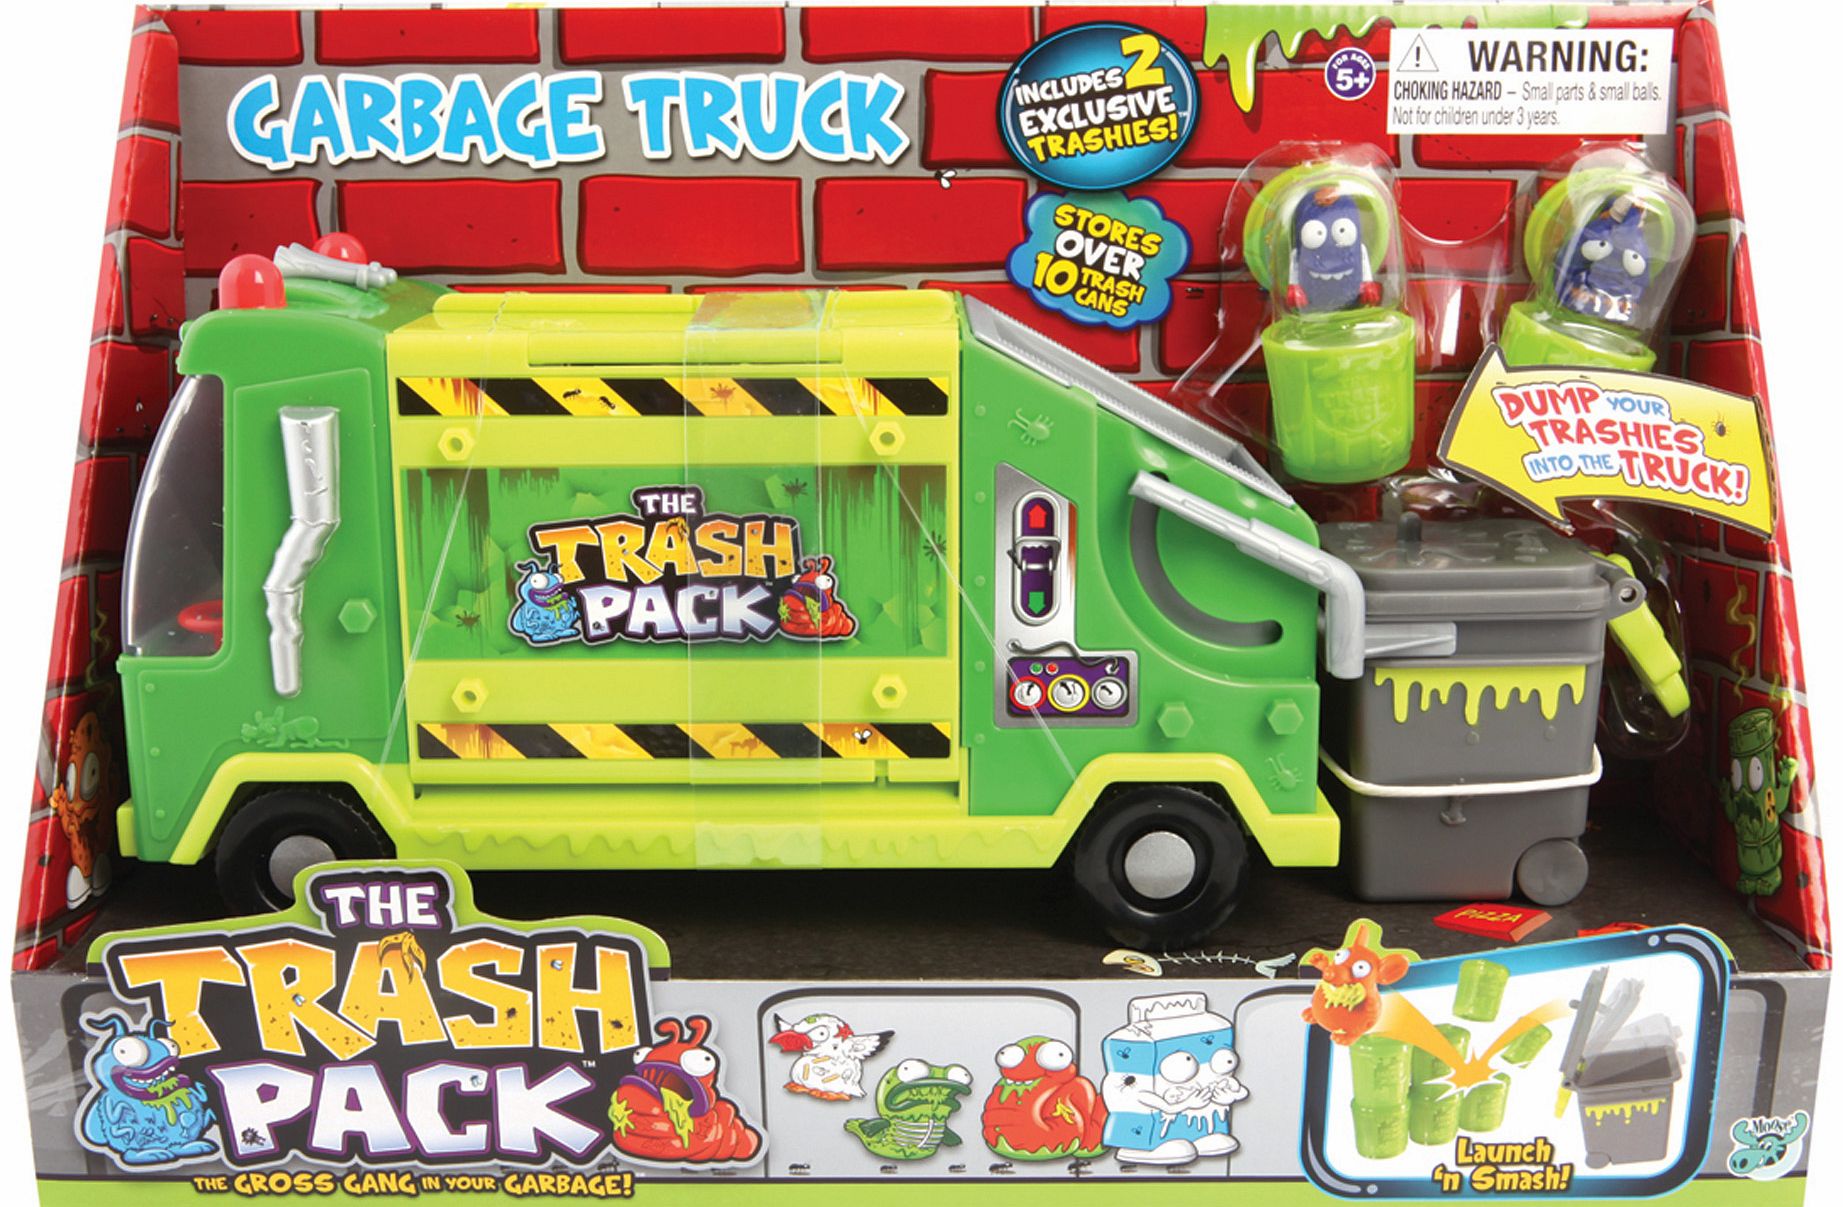 The Trash Pack Garbage Truck